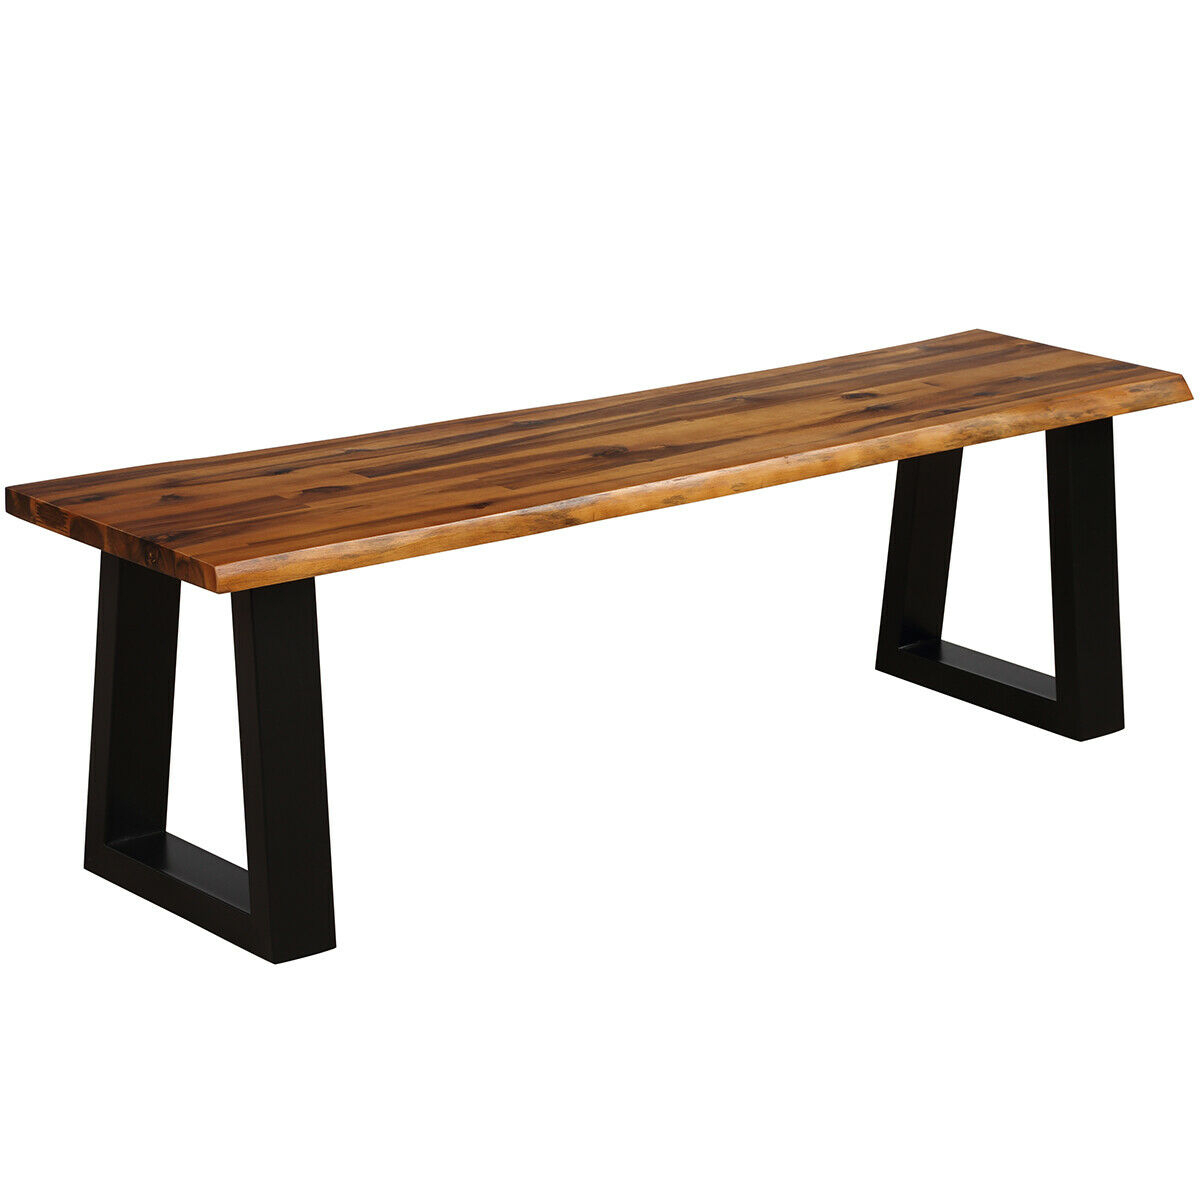 Solid Acacia Wood Patio Bench Dining Bench Outdoor W/Rustic Metal Legs